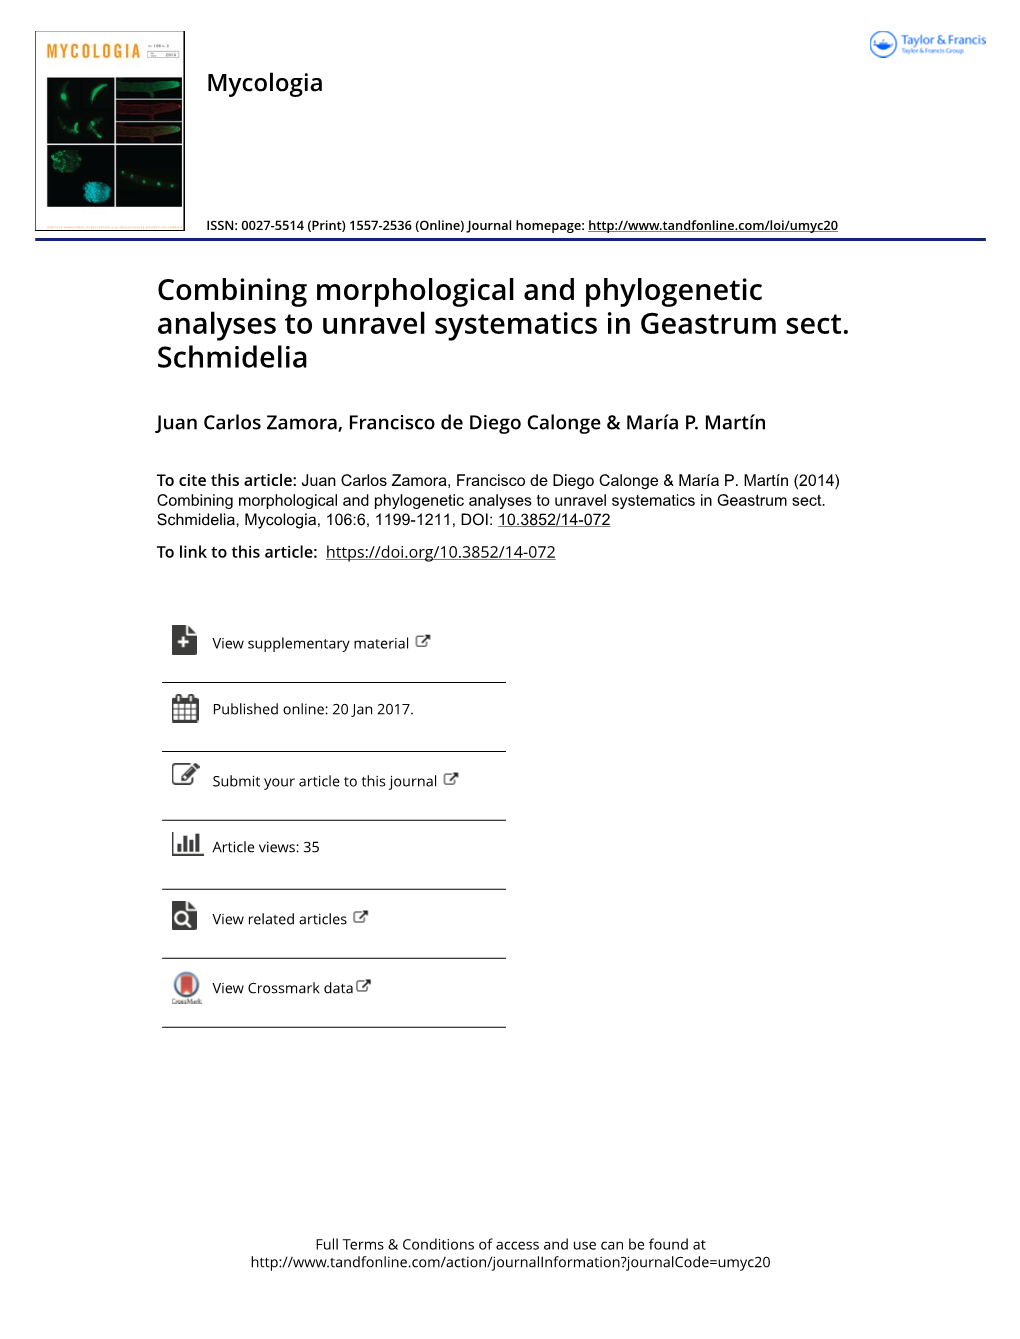 Combining Morphological and Phylogenetic Analyses to Unravel Systematics in Geastrum Sect